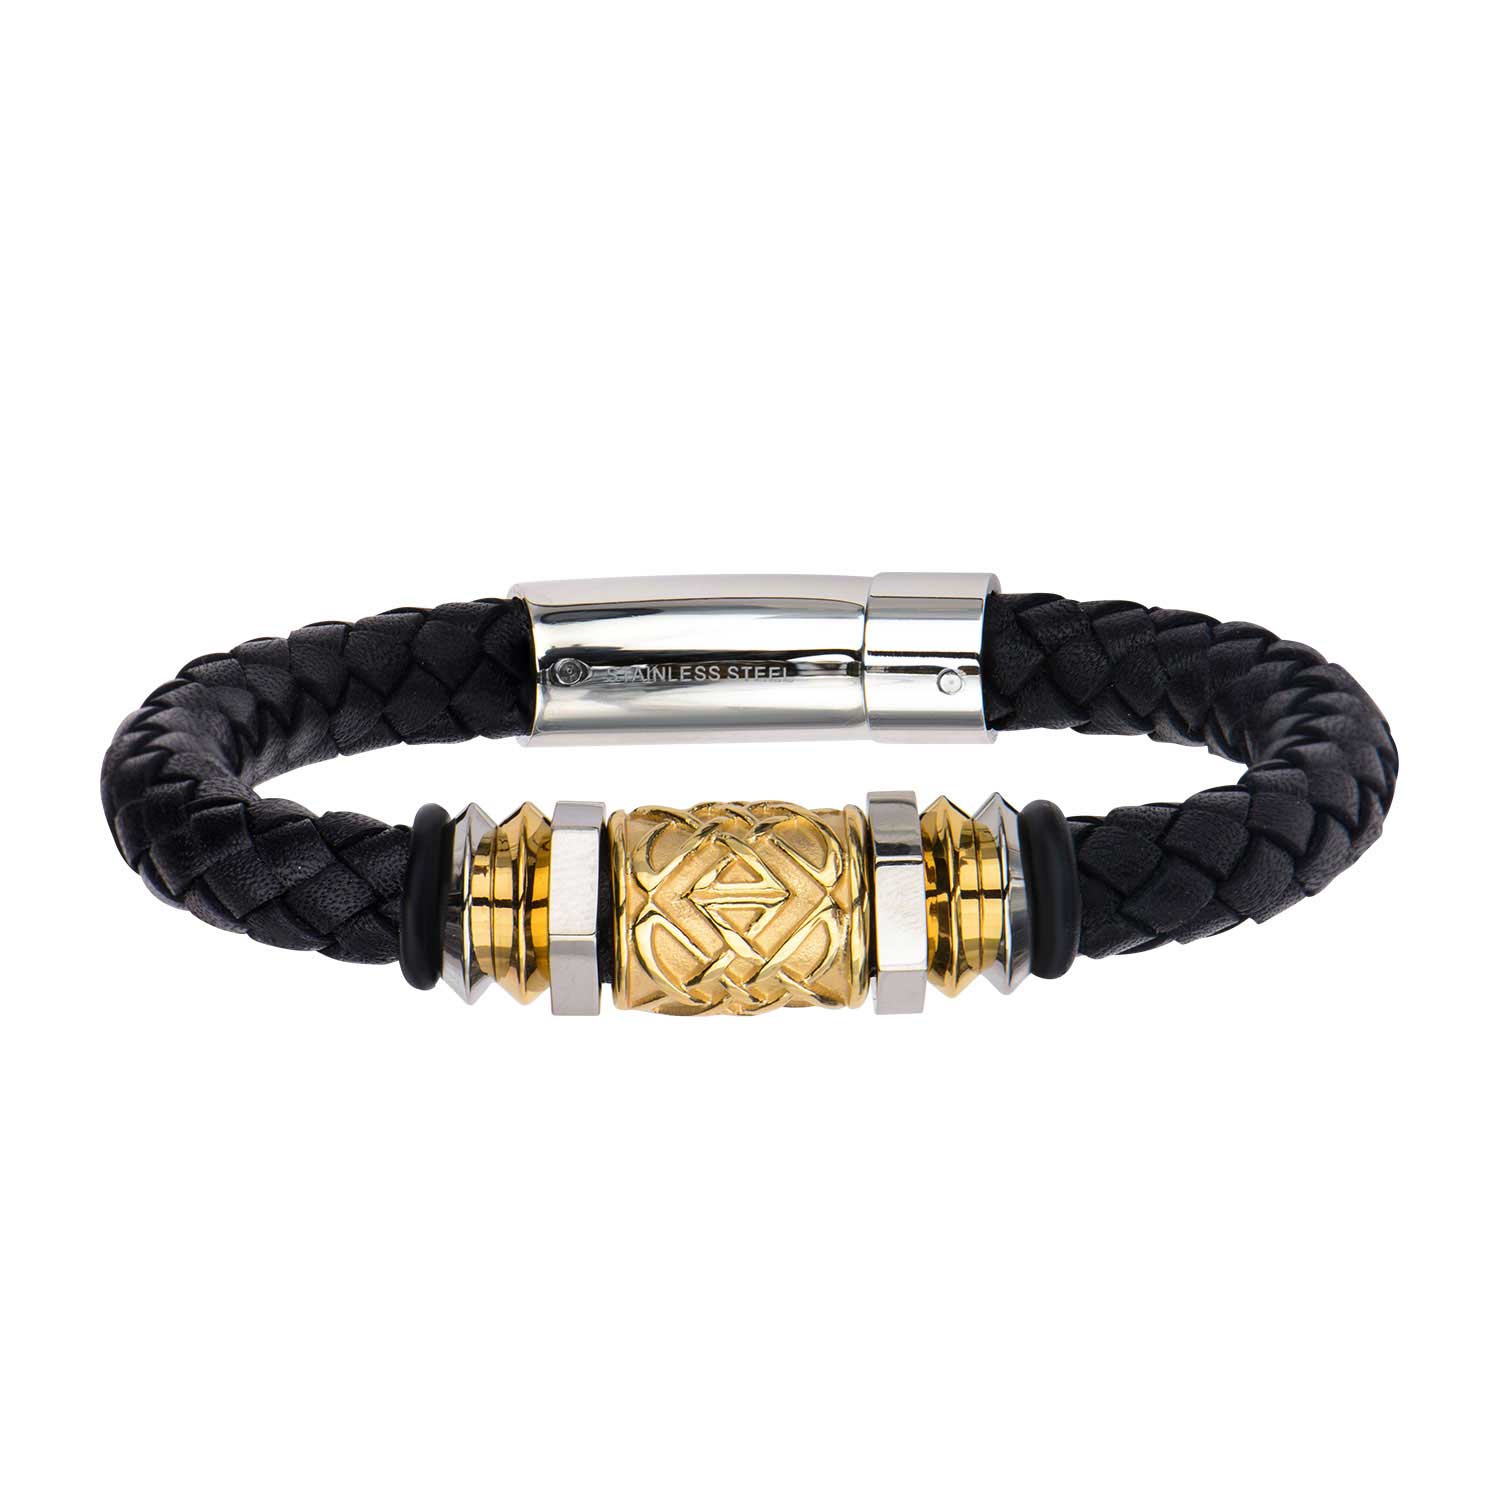 Steel and Gold Plated Bead in Black Braided Leather Bracelet